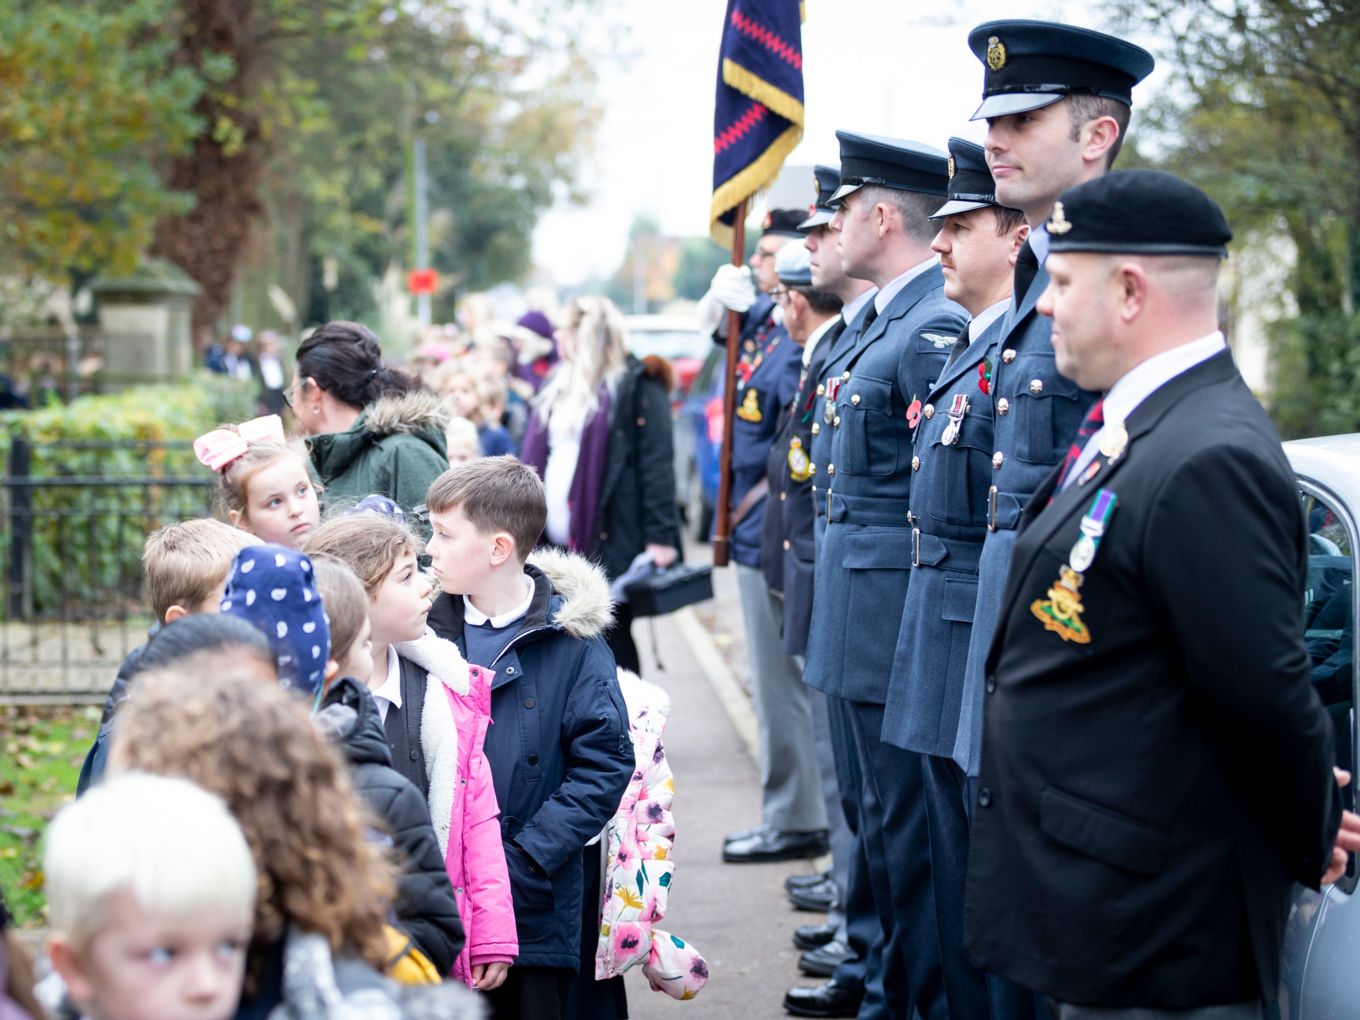 The act of remembrance at Newborough